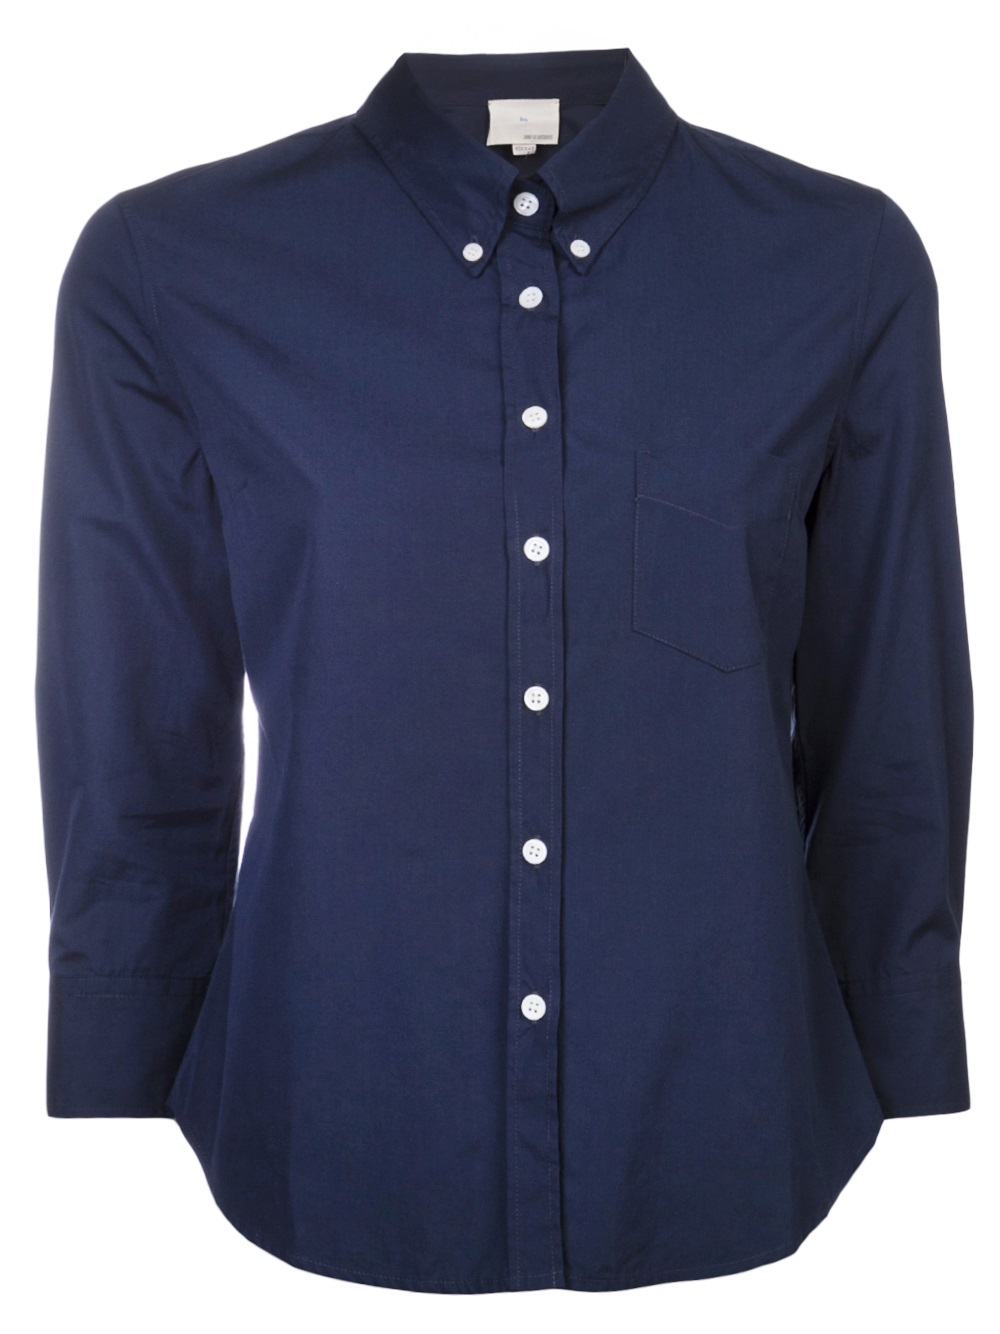 Boy By Band Of Outsiders Button Down Shirt in Blue (navy) | Lyst